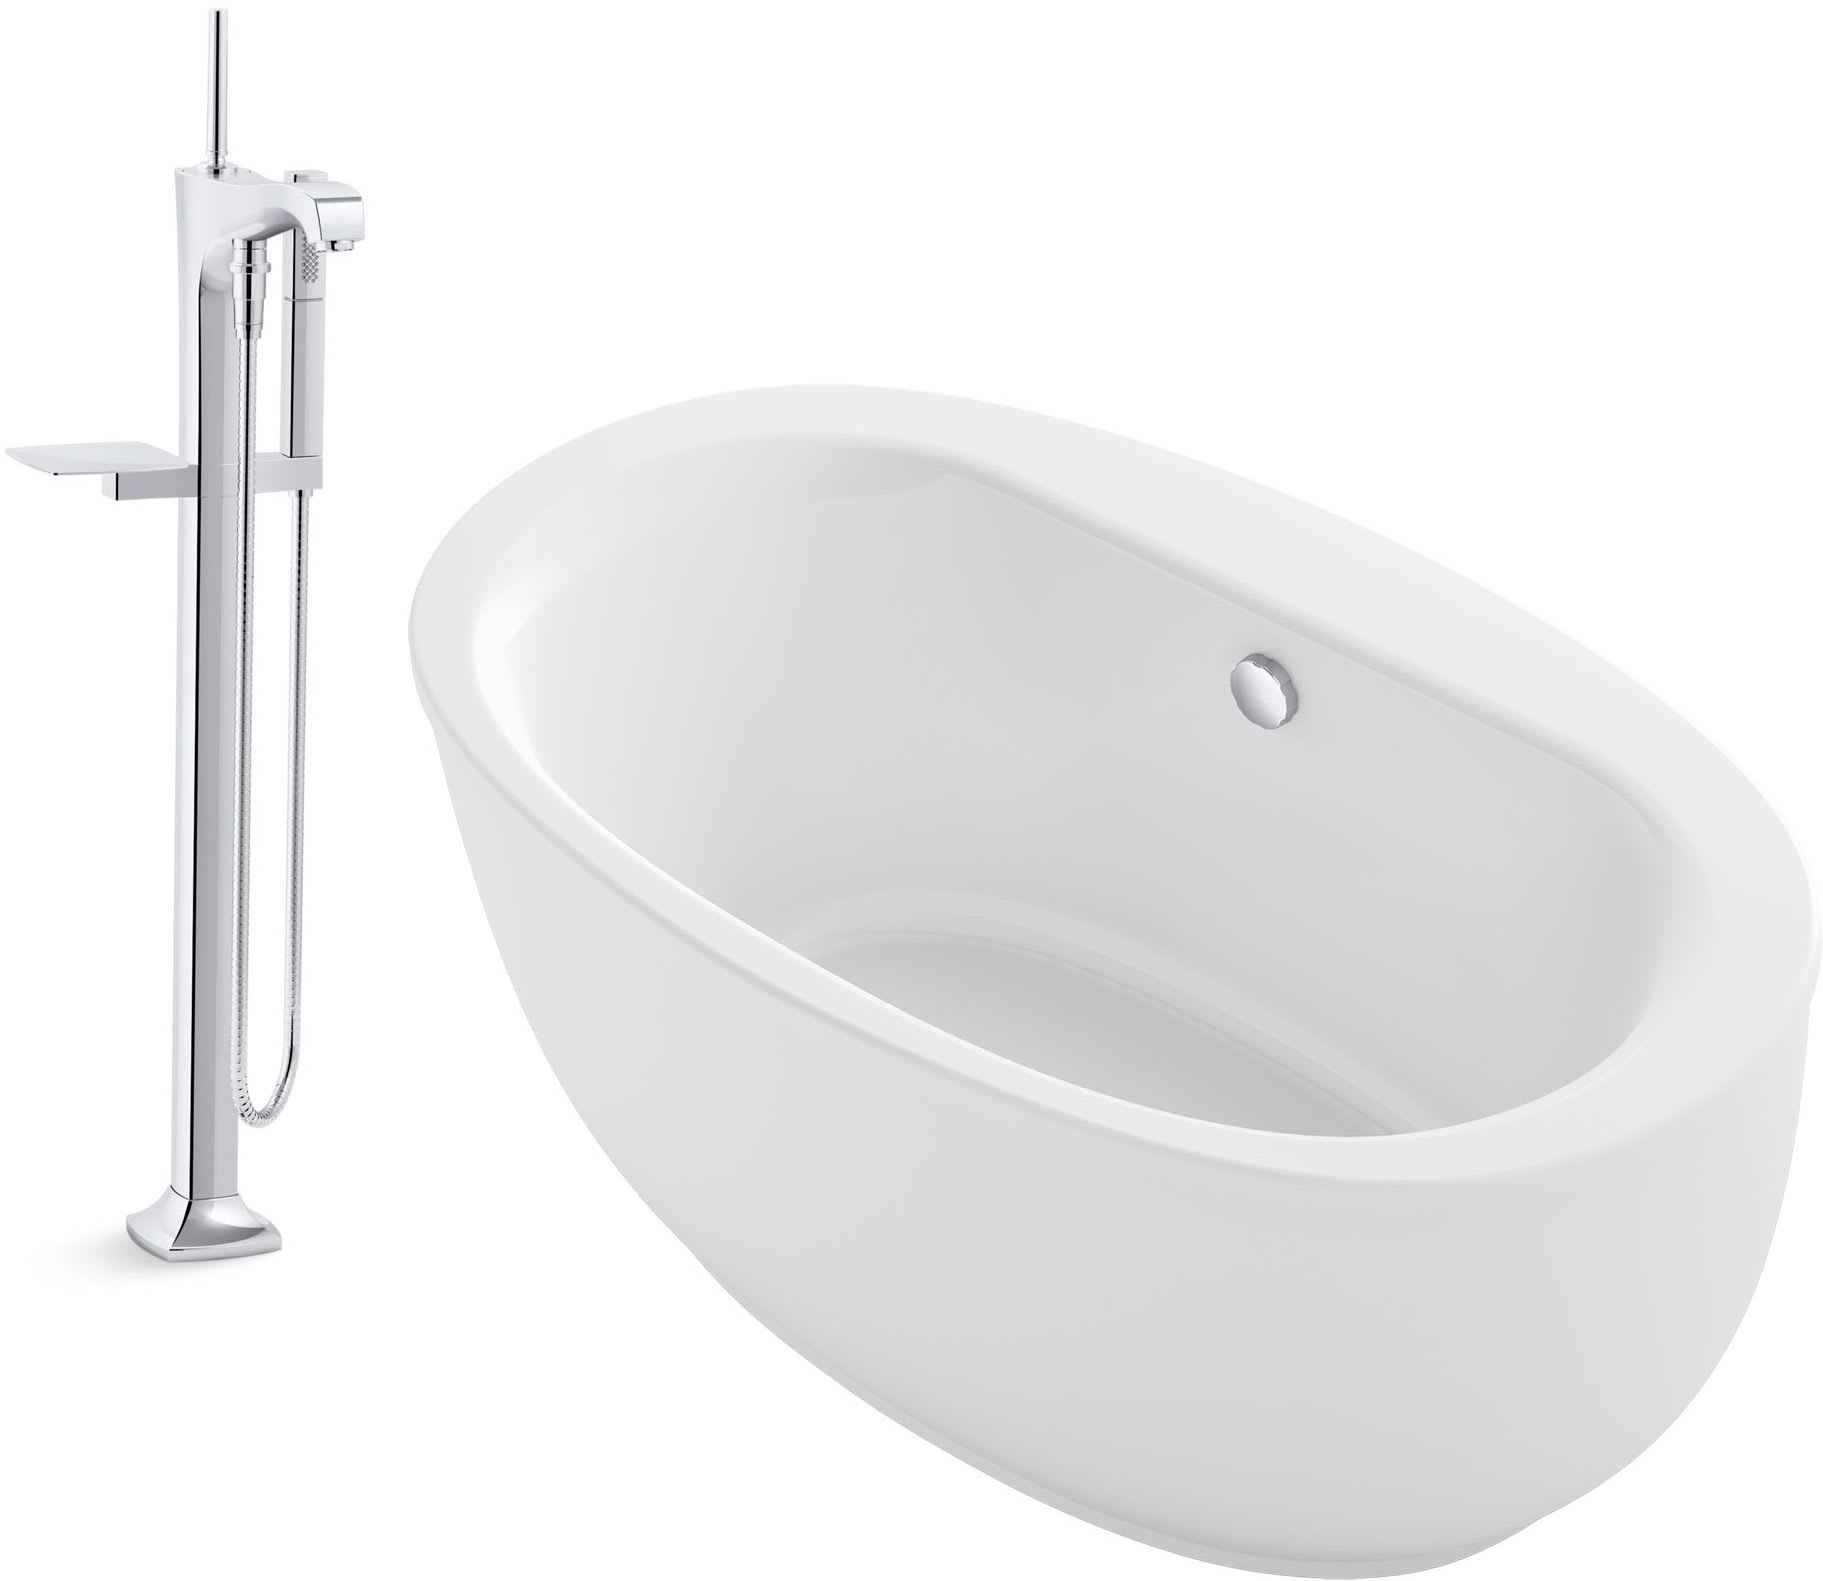 Kohler K 24002 T97331 Cp White Polished Chrome Filler Sunstruck 60 Freestanding Acrylic Soaking Tub Package With Center Drain And Margaux Floor Mounted Tub Filler Includes Handshower Faucetdirect Com